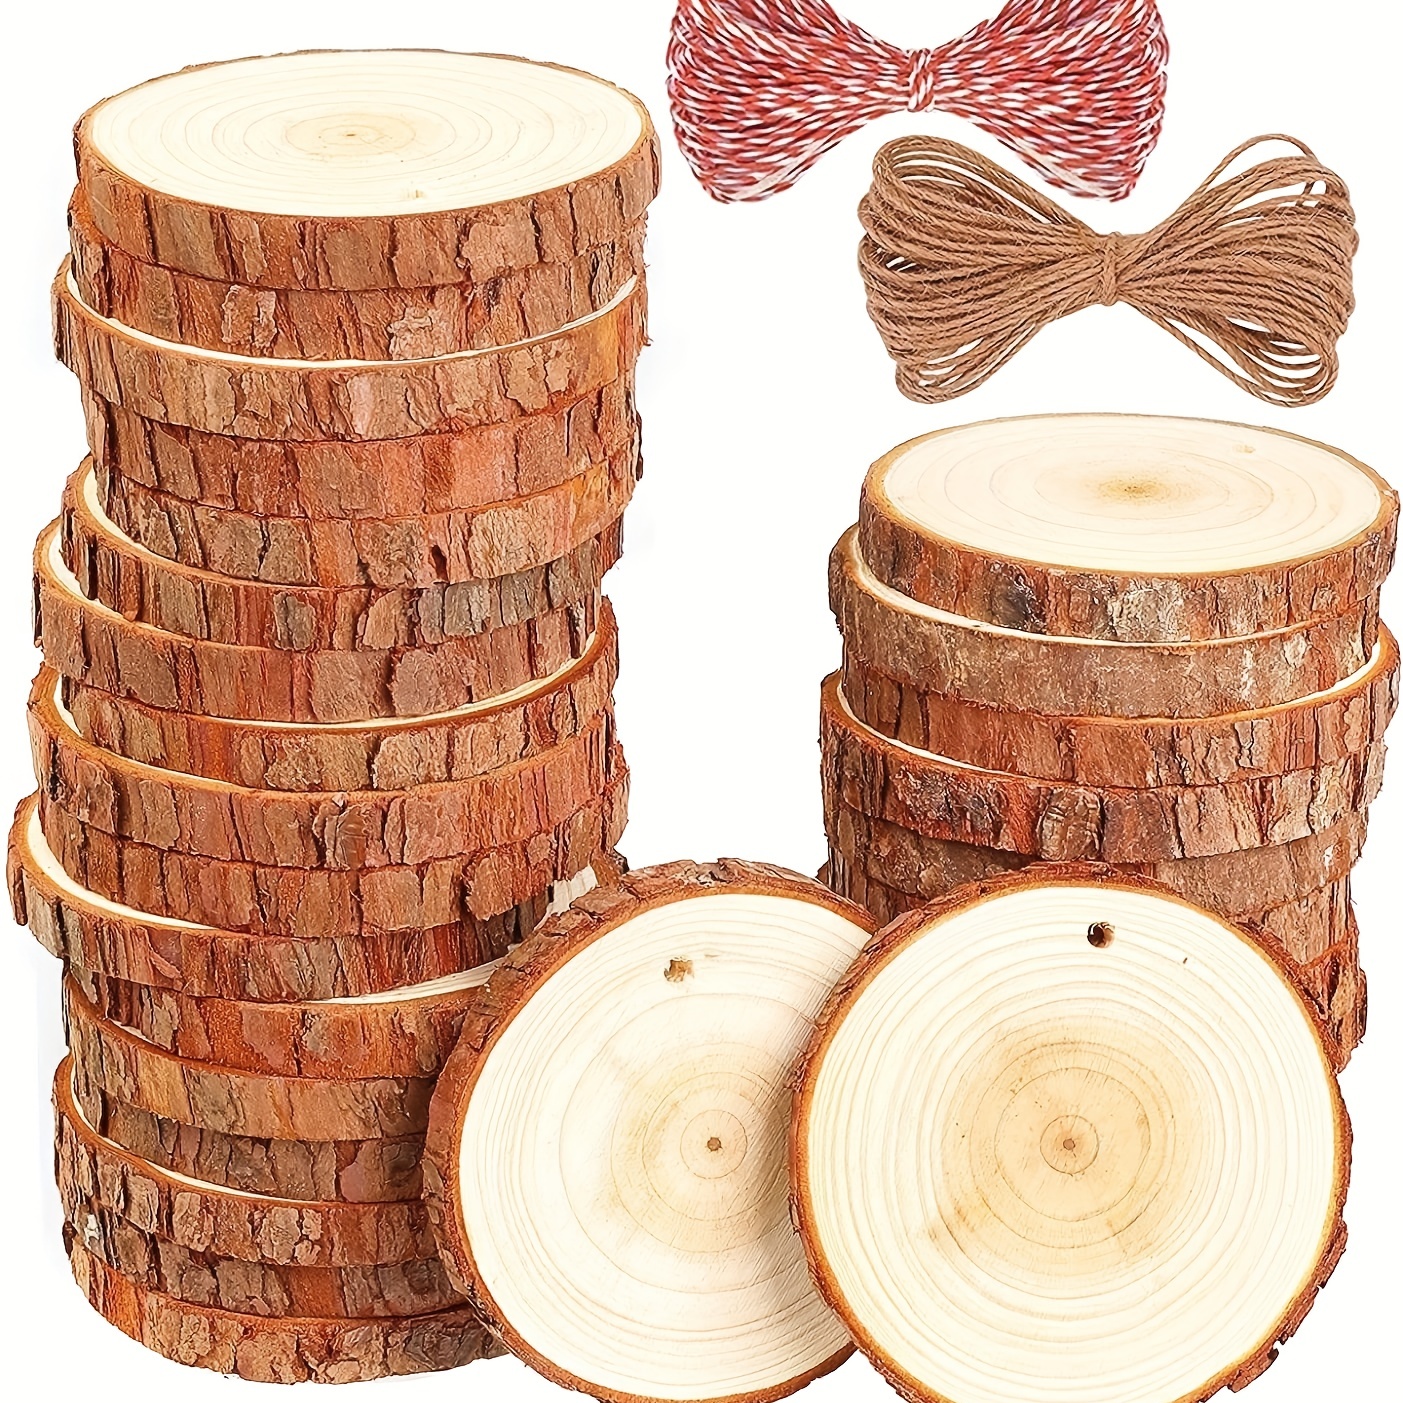 PLAFOPE 20pcs Wood Crafts Wooden Shapes for Crafts Craft Wood Slices  Unfinished Wood Discs Wooden DIY Crafts Wooden Pieces Wooden Pieces for  Crafts